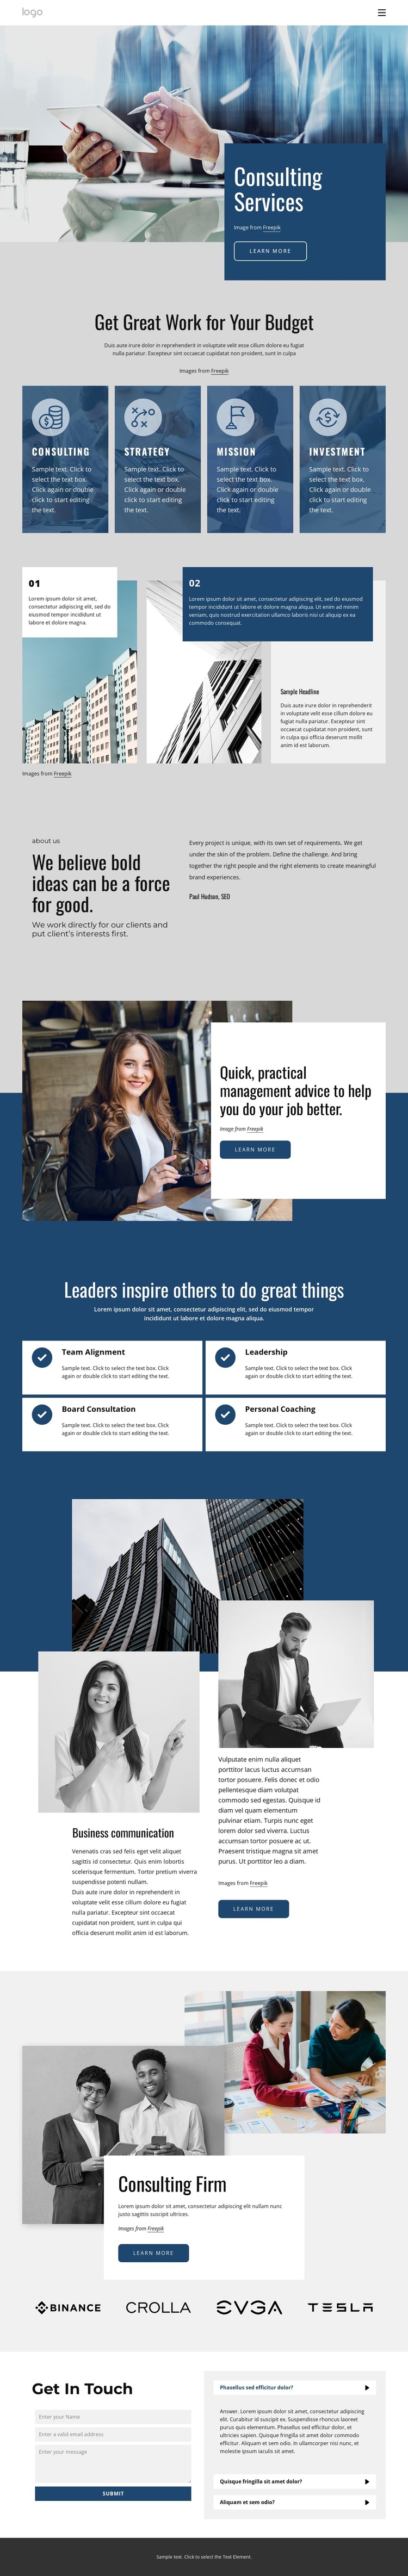 Professional consulting service firm HTML5 Template